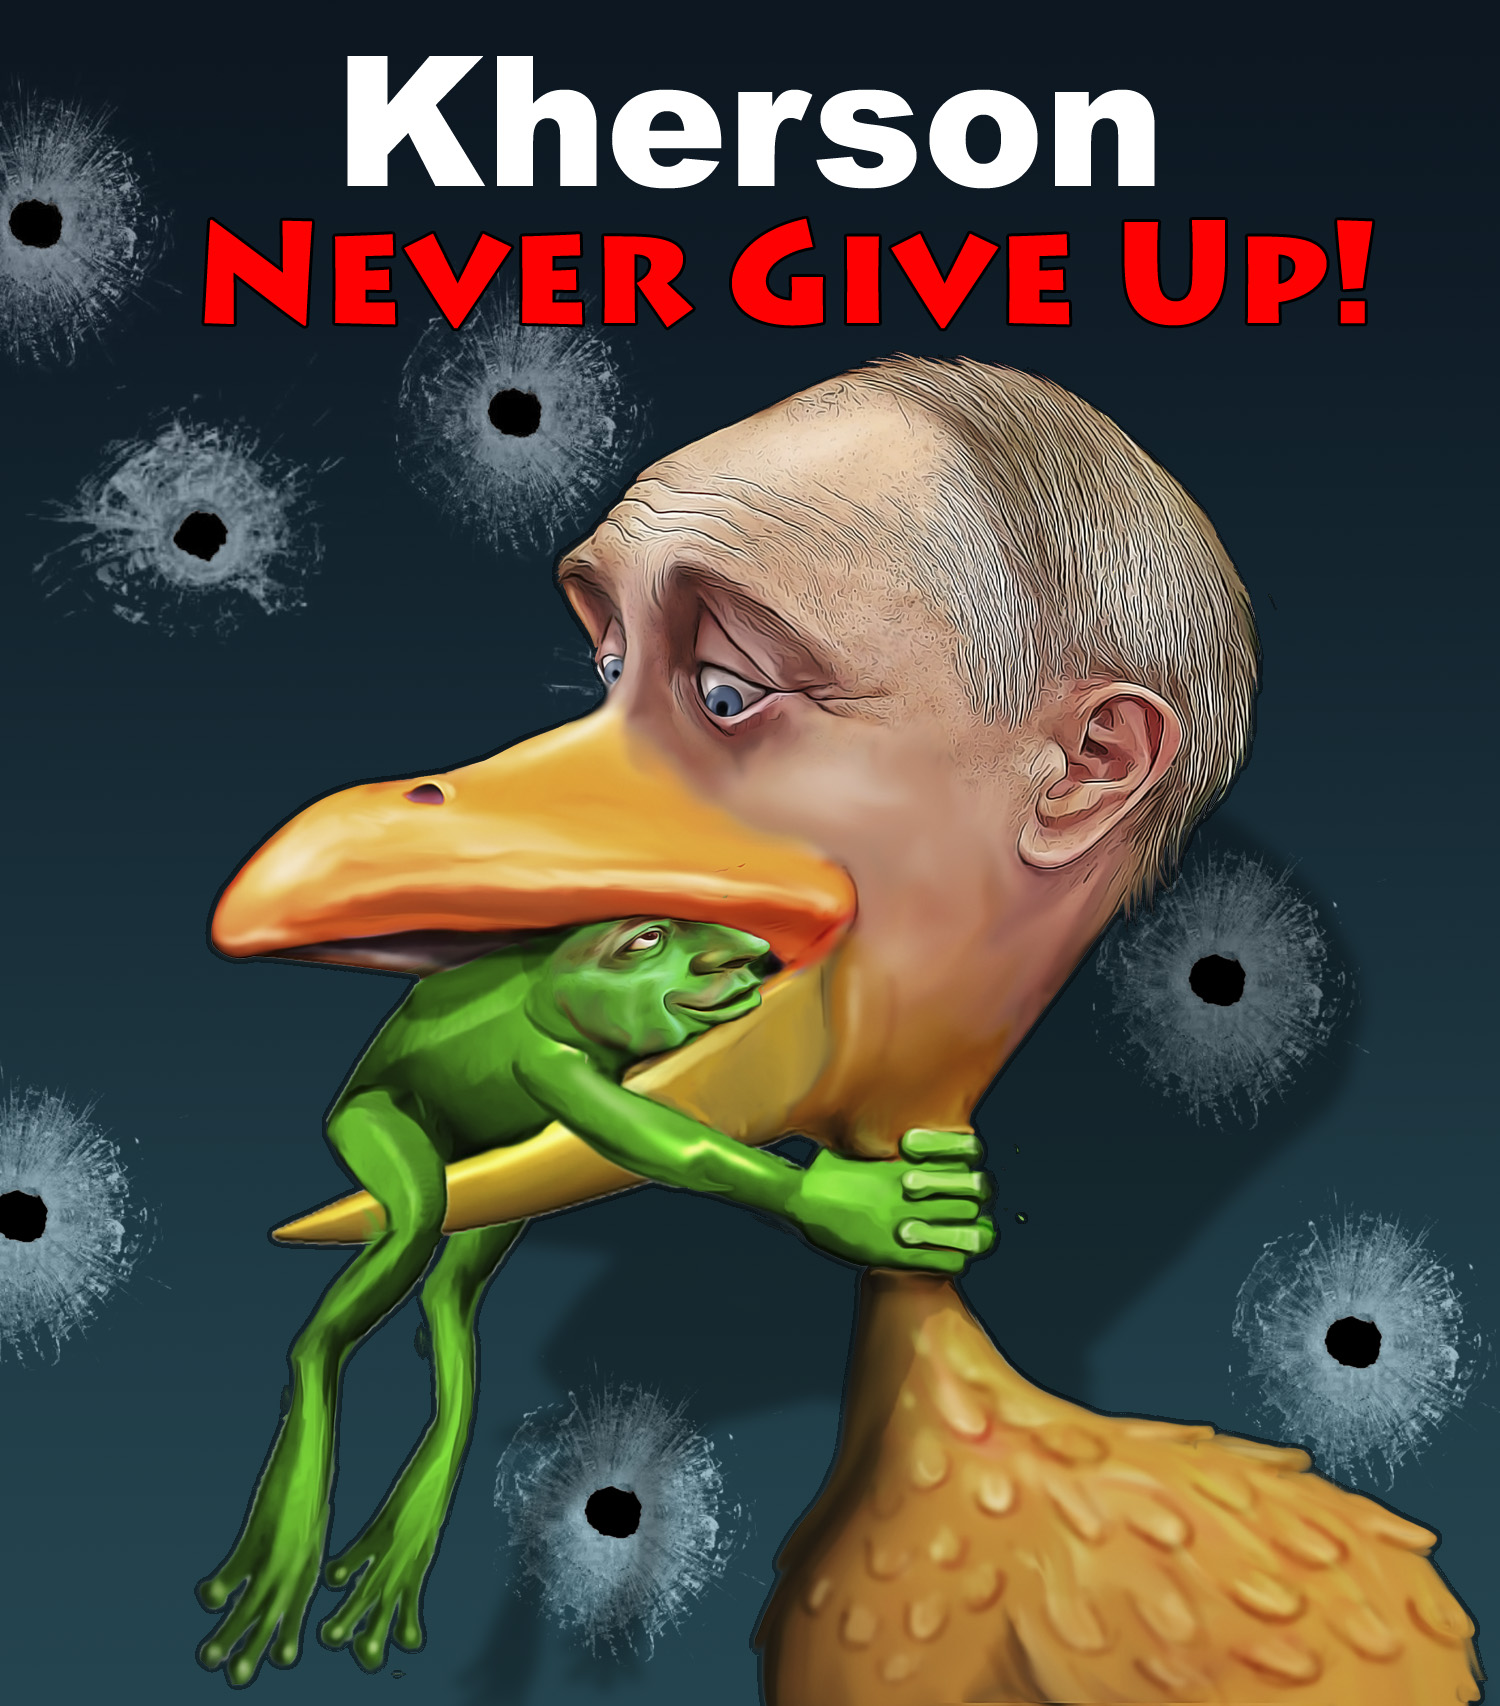 Kherson Never Give Up!